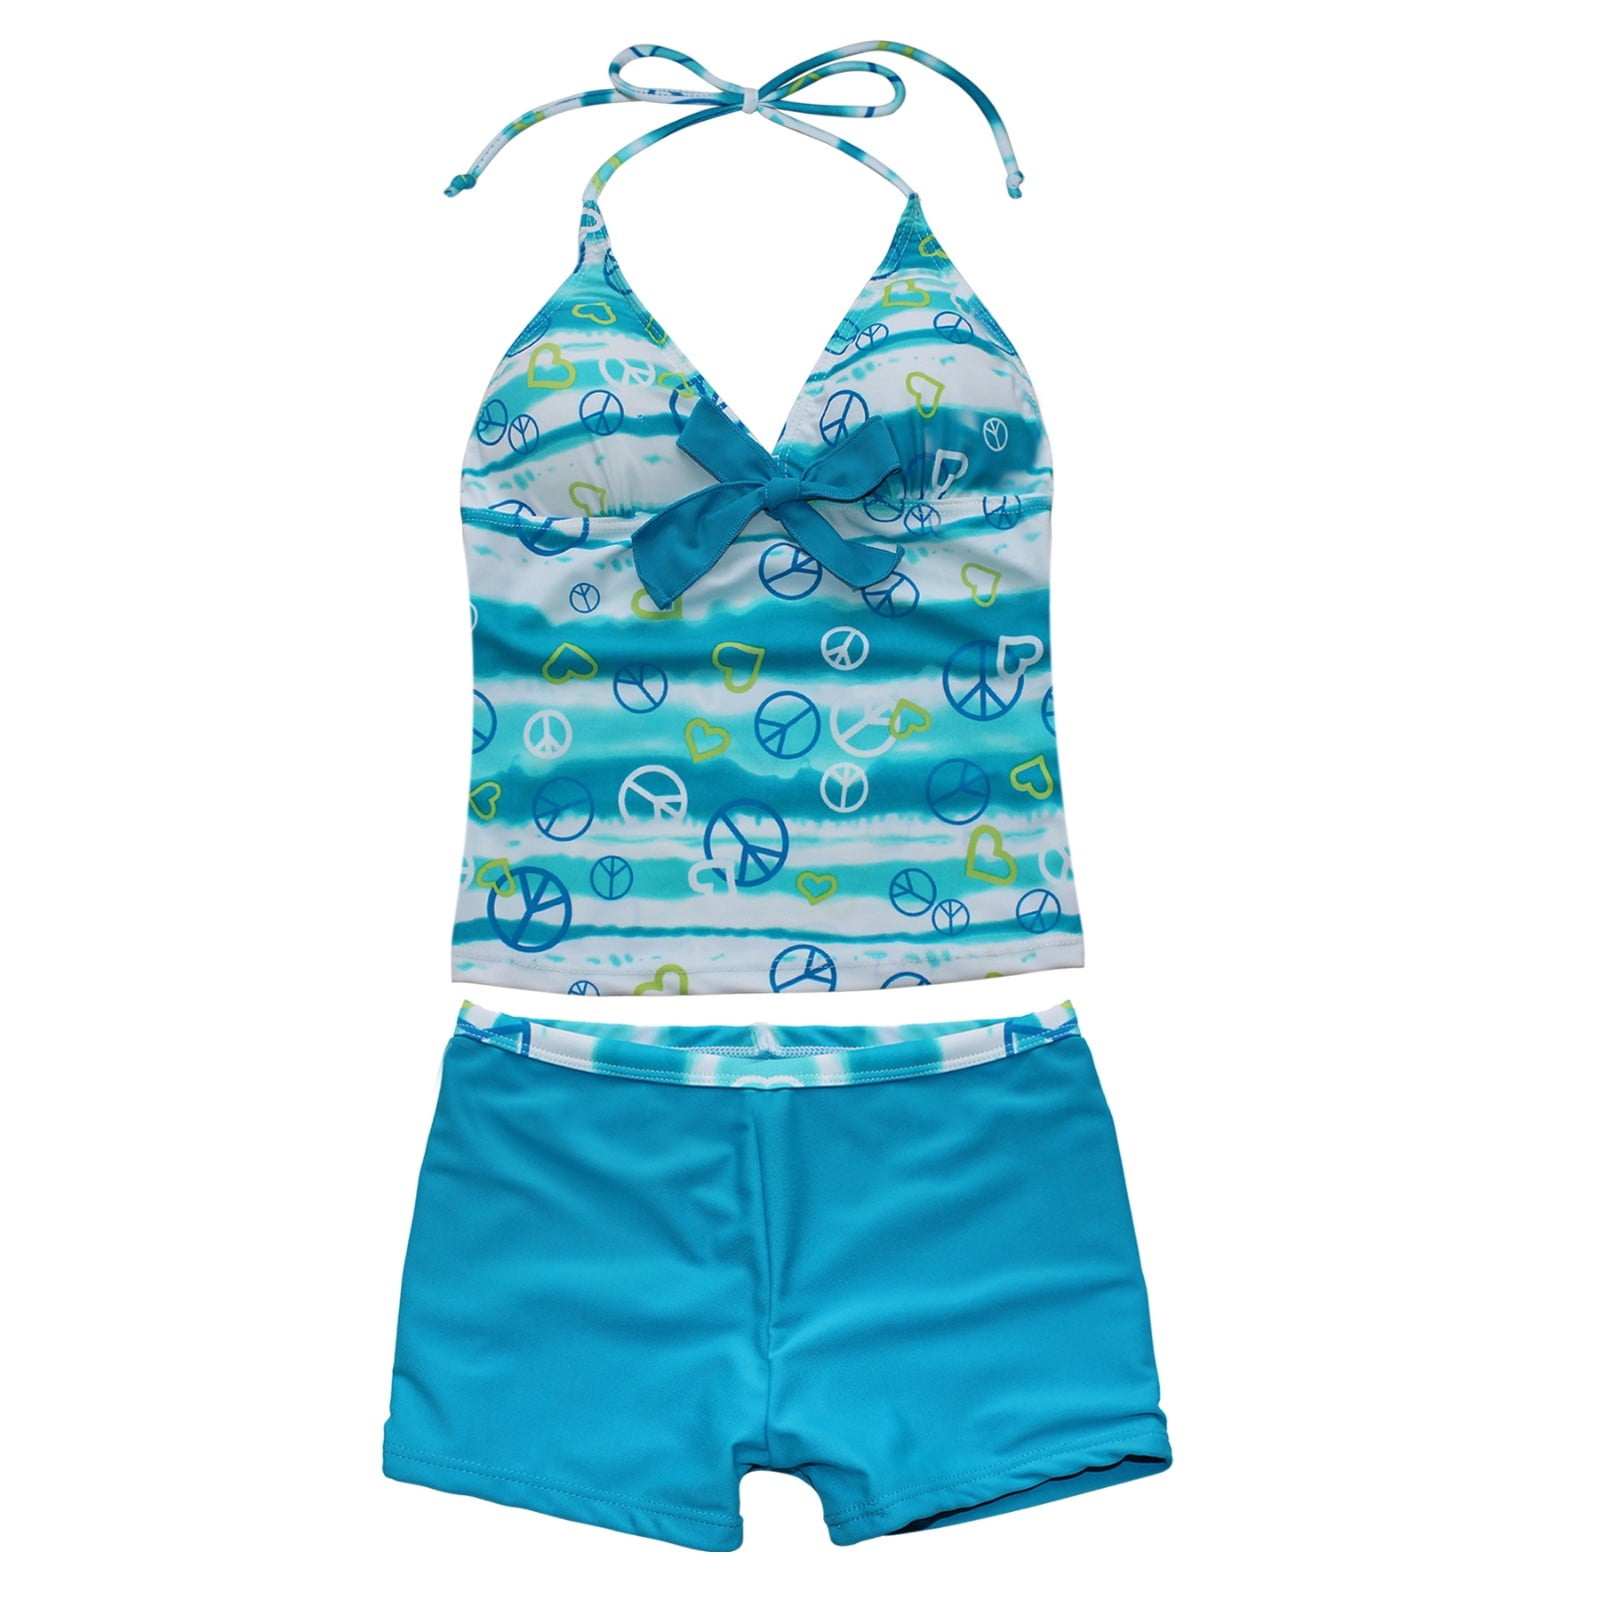 Alvivi Girls Two-Piece Swimsuit Halter Tops and Shorts Set Floral ...